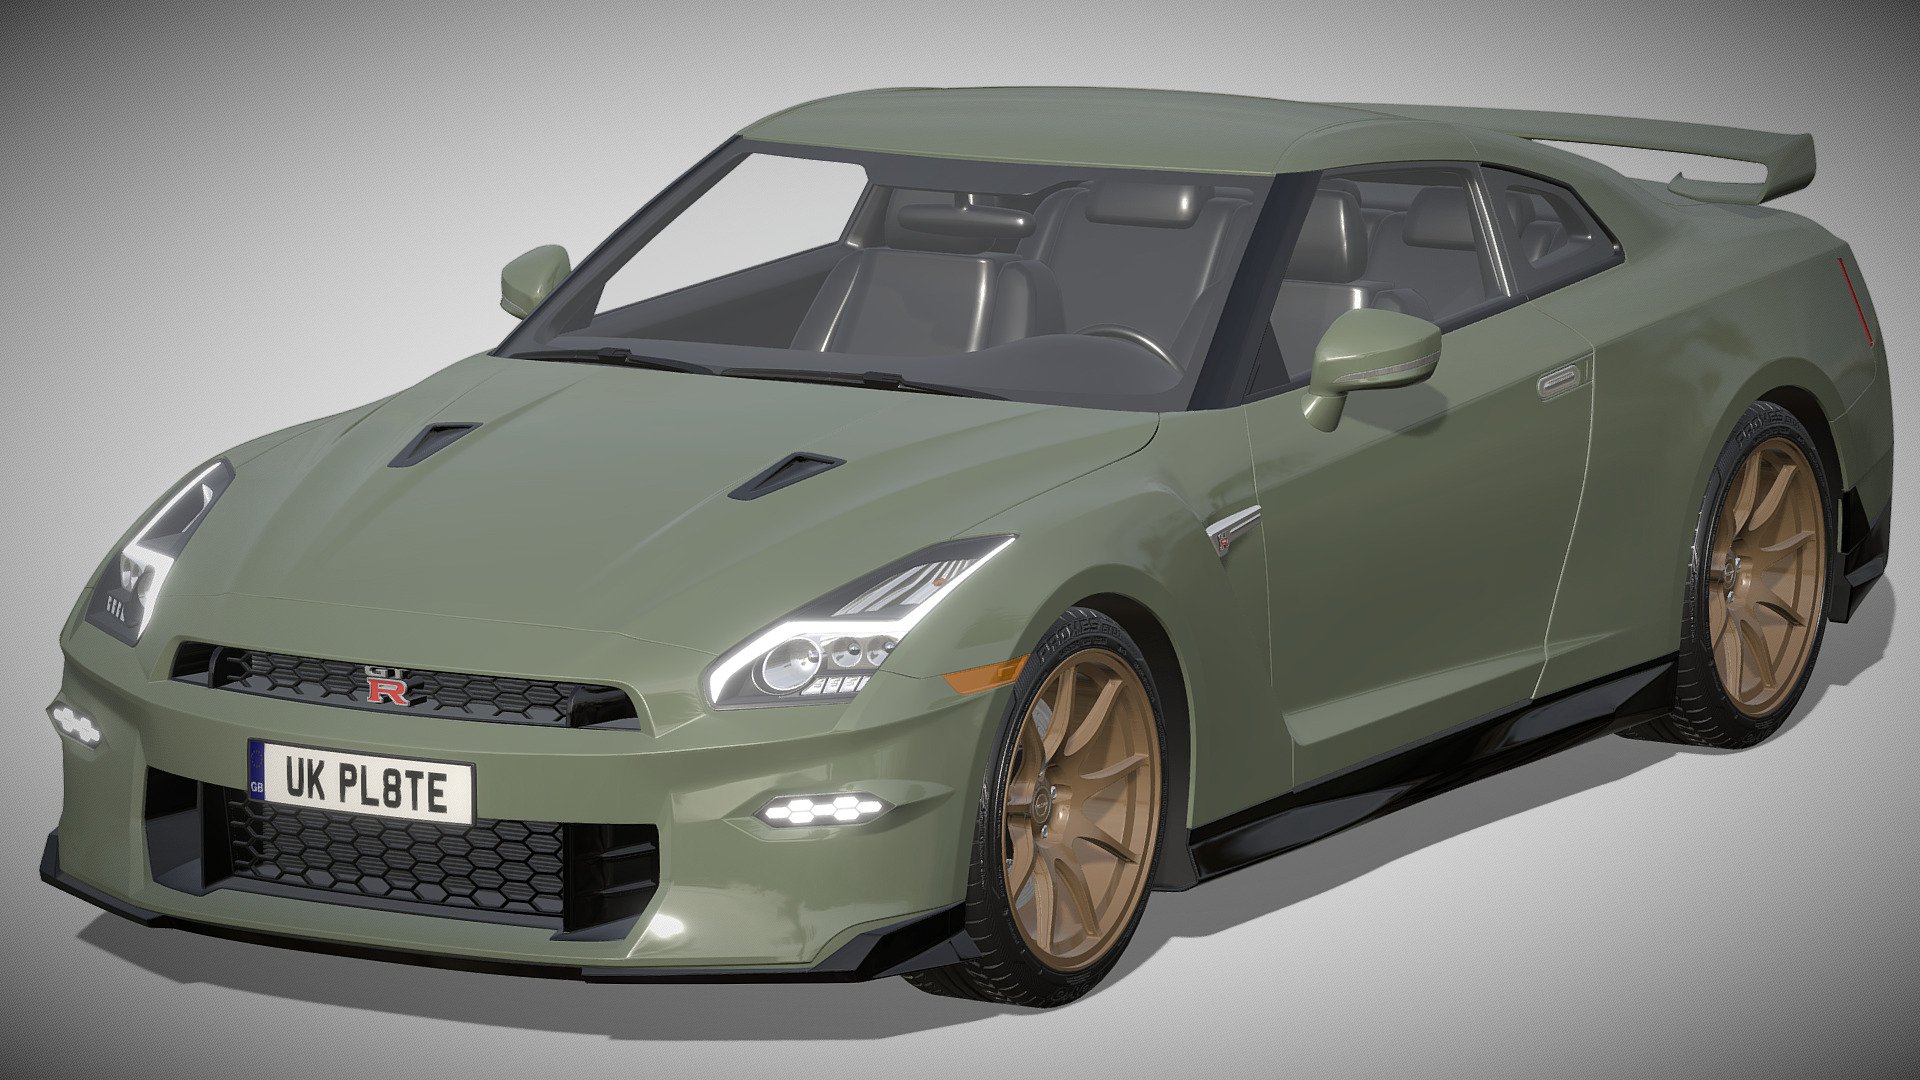 Nissan GT-R 2024

https://www.nissanusa.com/vehicles/sports-cars/gt-r.html

Clean geometry Light weight model, yet completely detailed for HI-Res renders. Use for movies, Advertisements or games

Corona render and materials

All textures include in *.rar files

Lighting setup is not included in the file! - Nissan GT-R 2024 - Buy Royalty Free 3D model by zifir3d 3d model